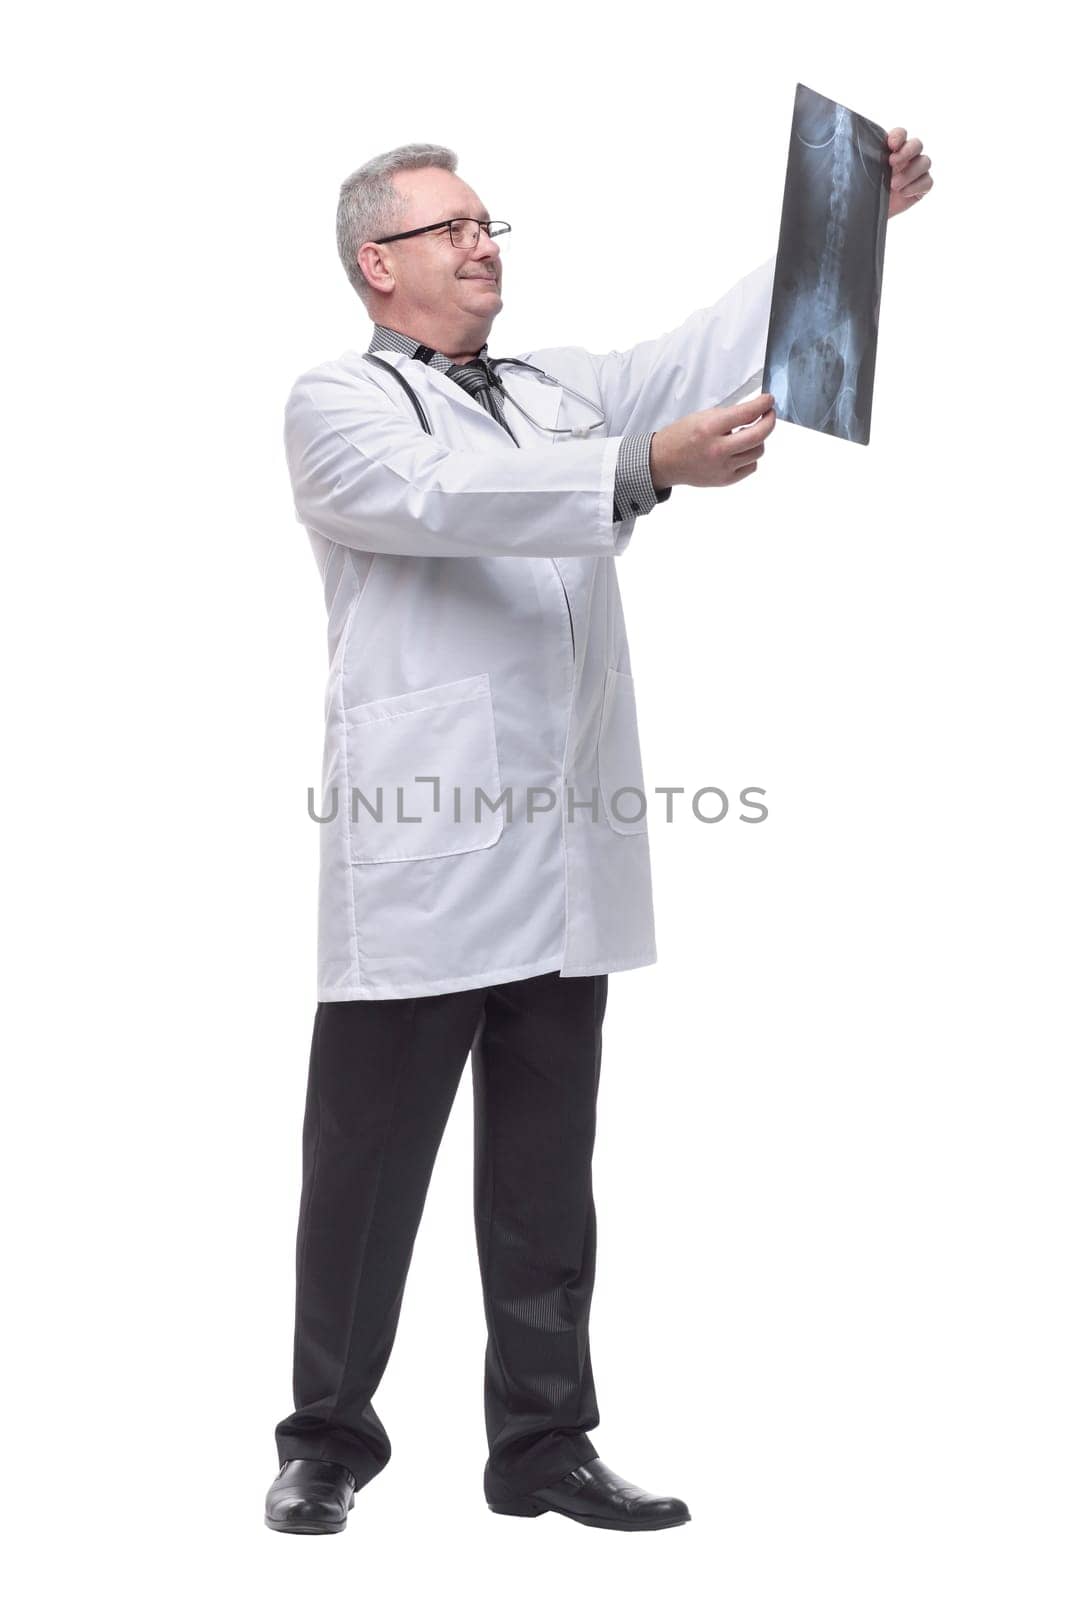 Attractive doctor examining an x-ray and smiling at the camera by asdf